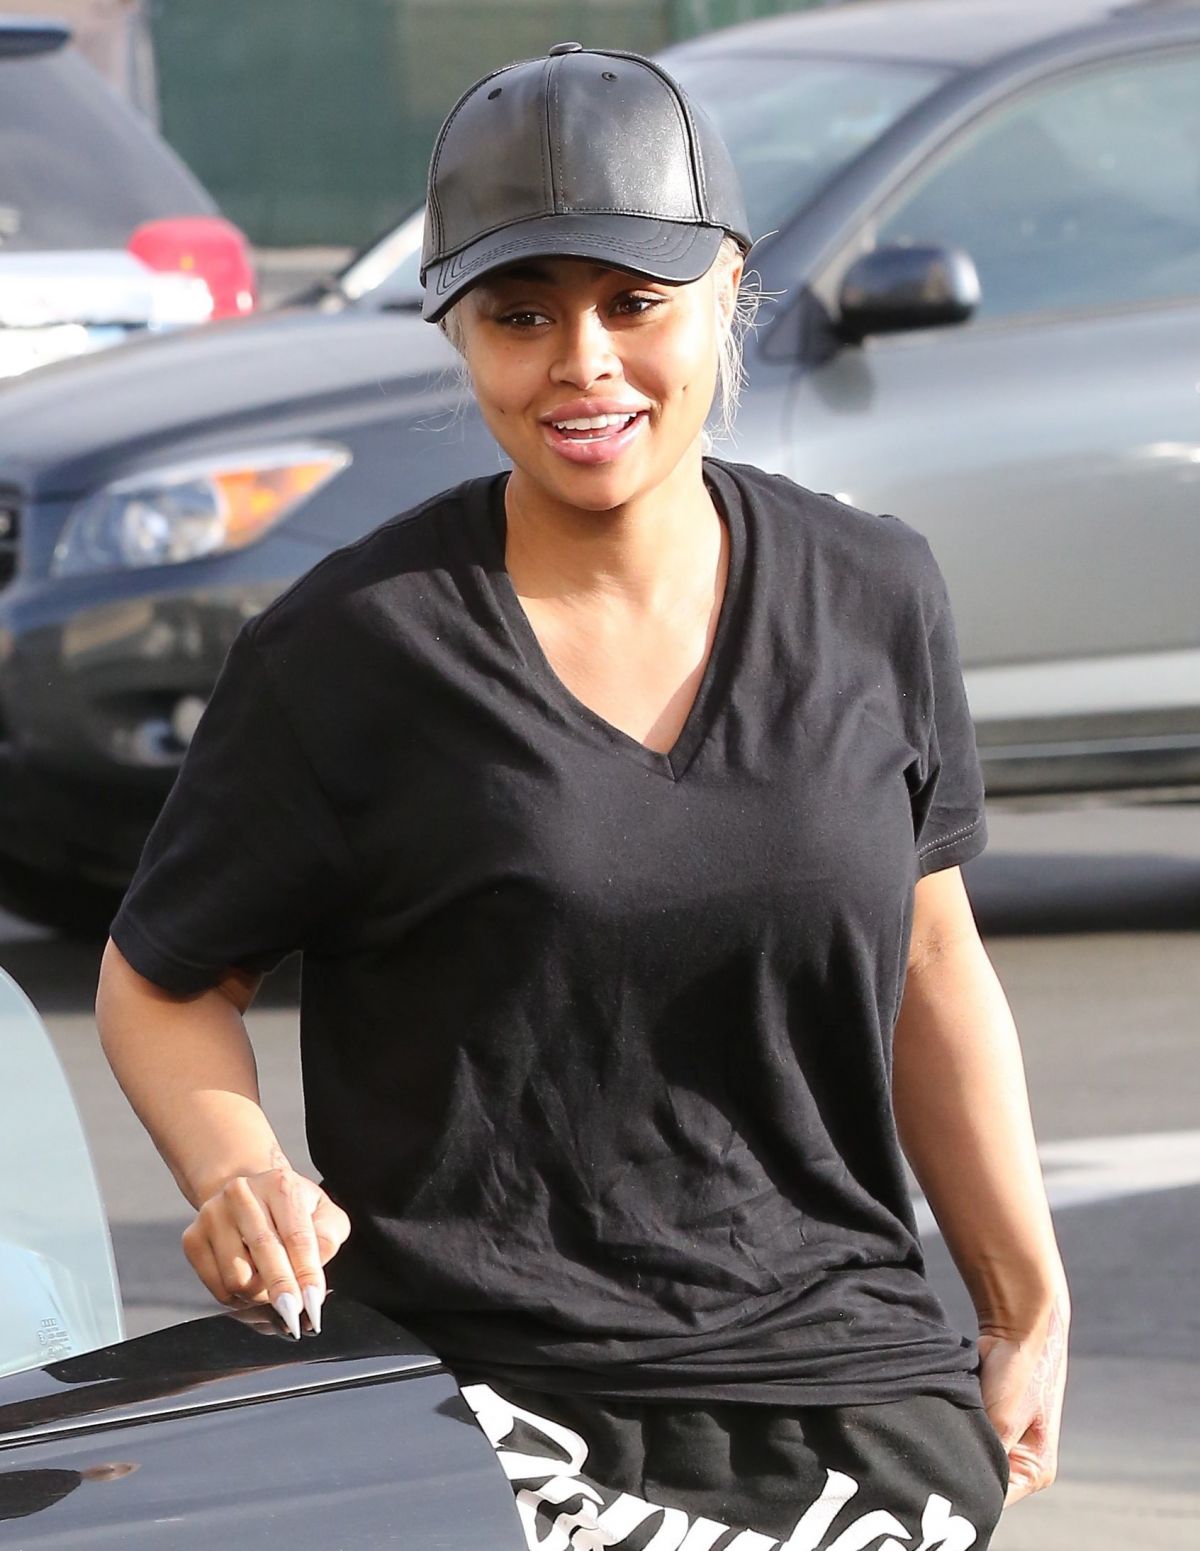 BLAC CHYNA Arrives at a Nail Salon in Los Angeles 01/28/2016